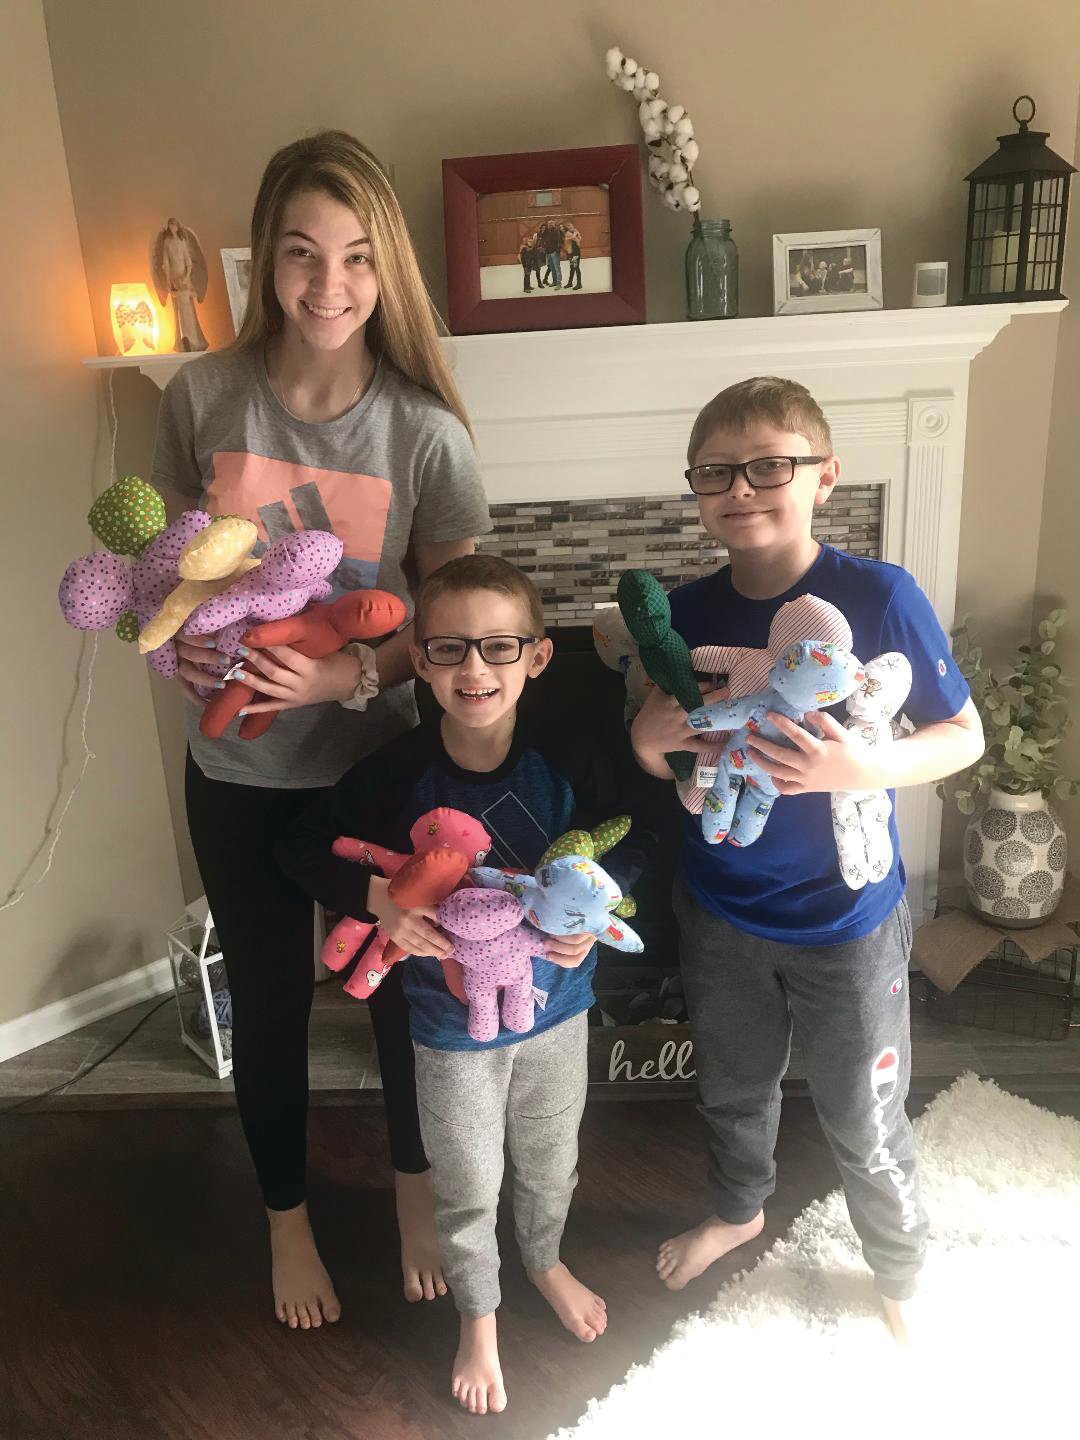 From left, Bella Mattingly, 15, Jackson Heisel, 6, and Alex Heisel, 9, show the comfort dolls they made for the Crawfordsville Kiwanis Club. The dolls will be distributed to the Family Crisis Shelter, Department of Child Services, Sylvia’s Child Advocacy Center of Lebanon and other agencies.